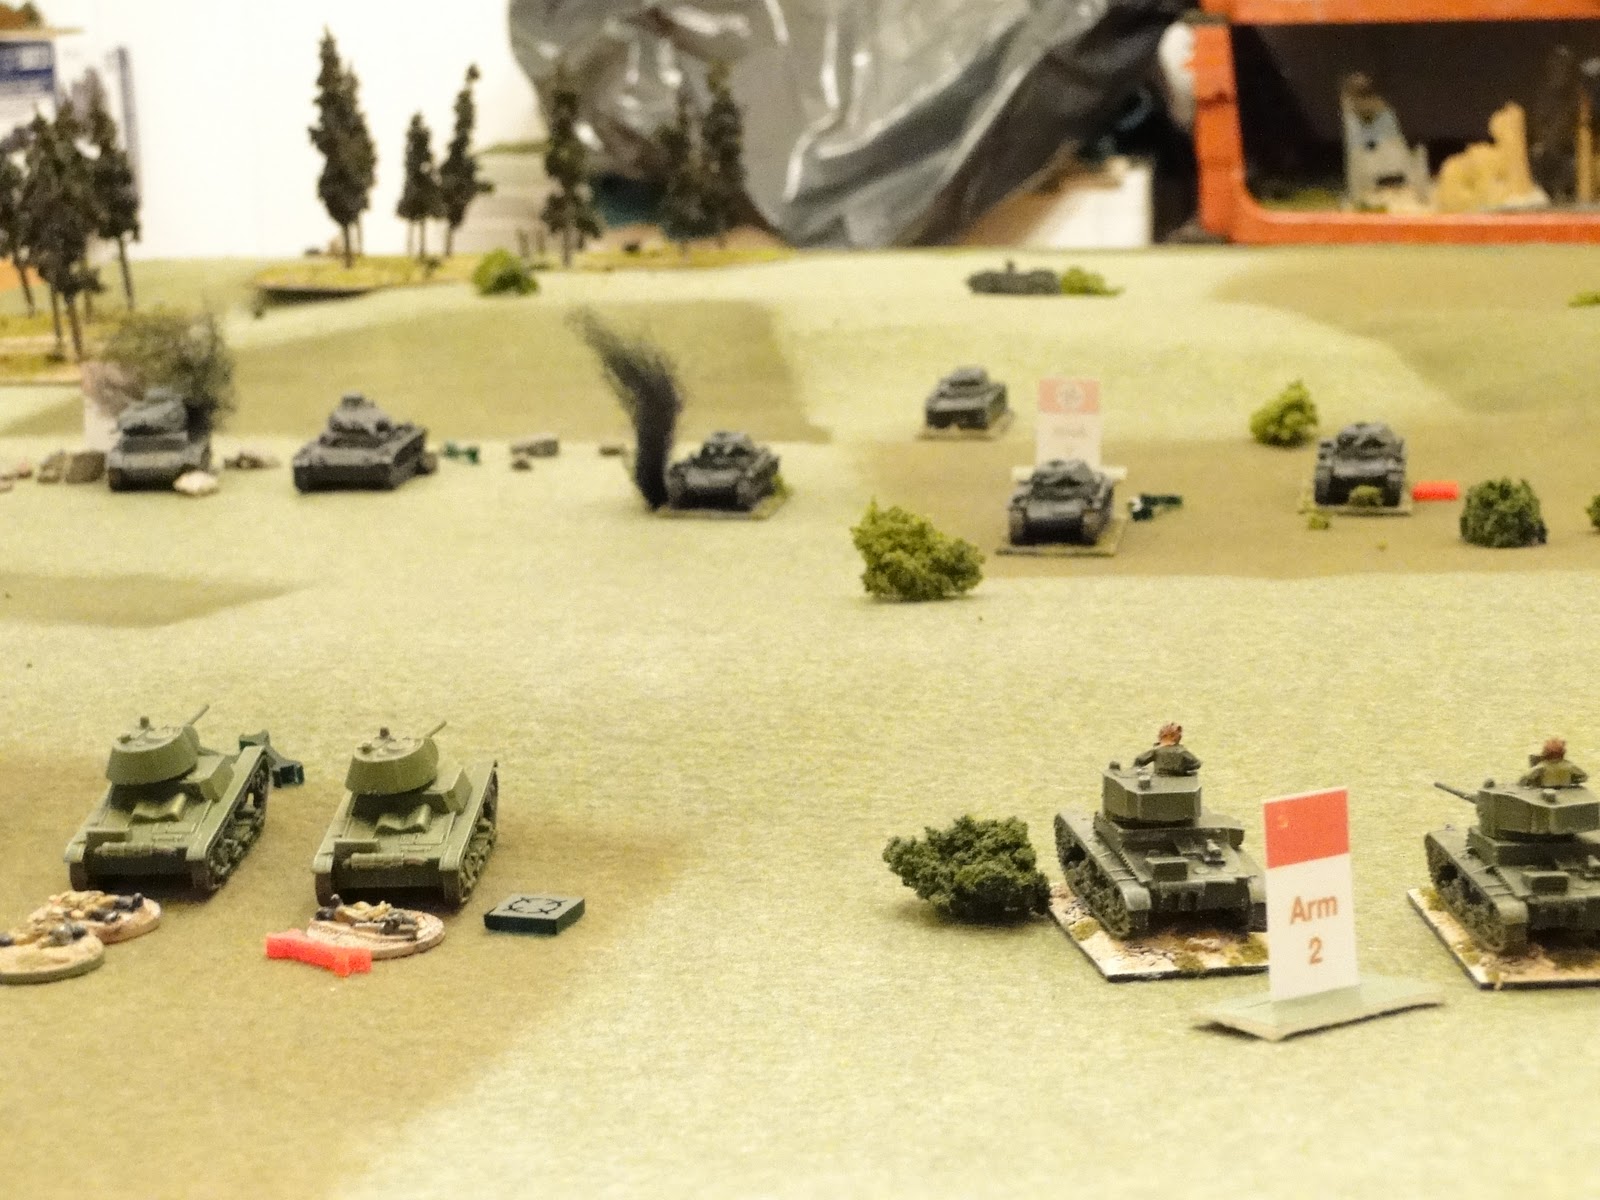 With the Russians in their superior position the armoured duel is going against the Germans.